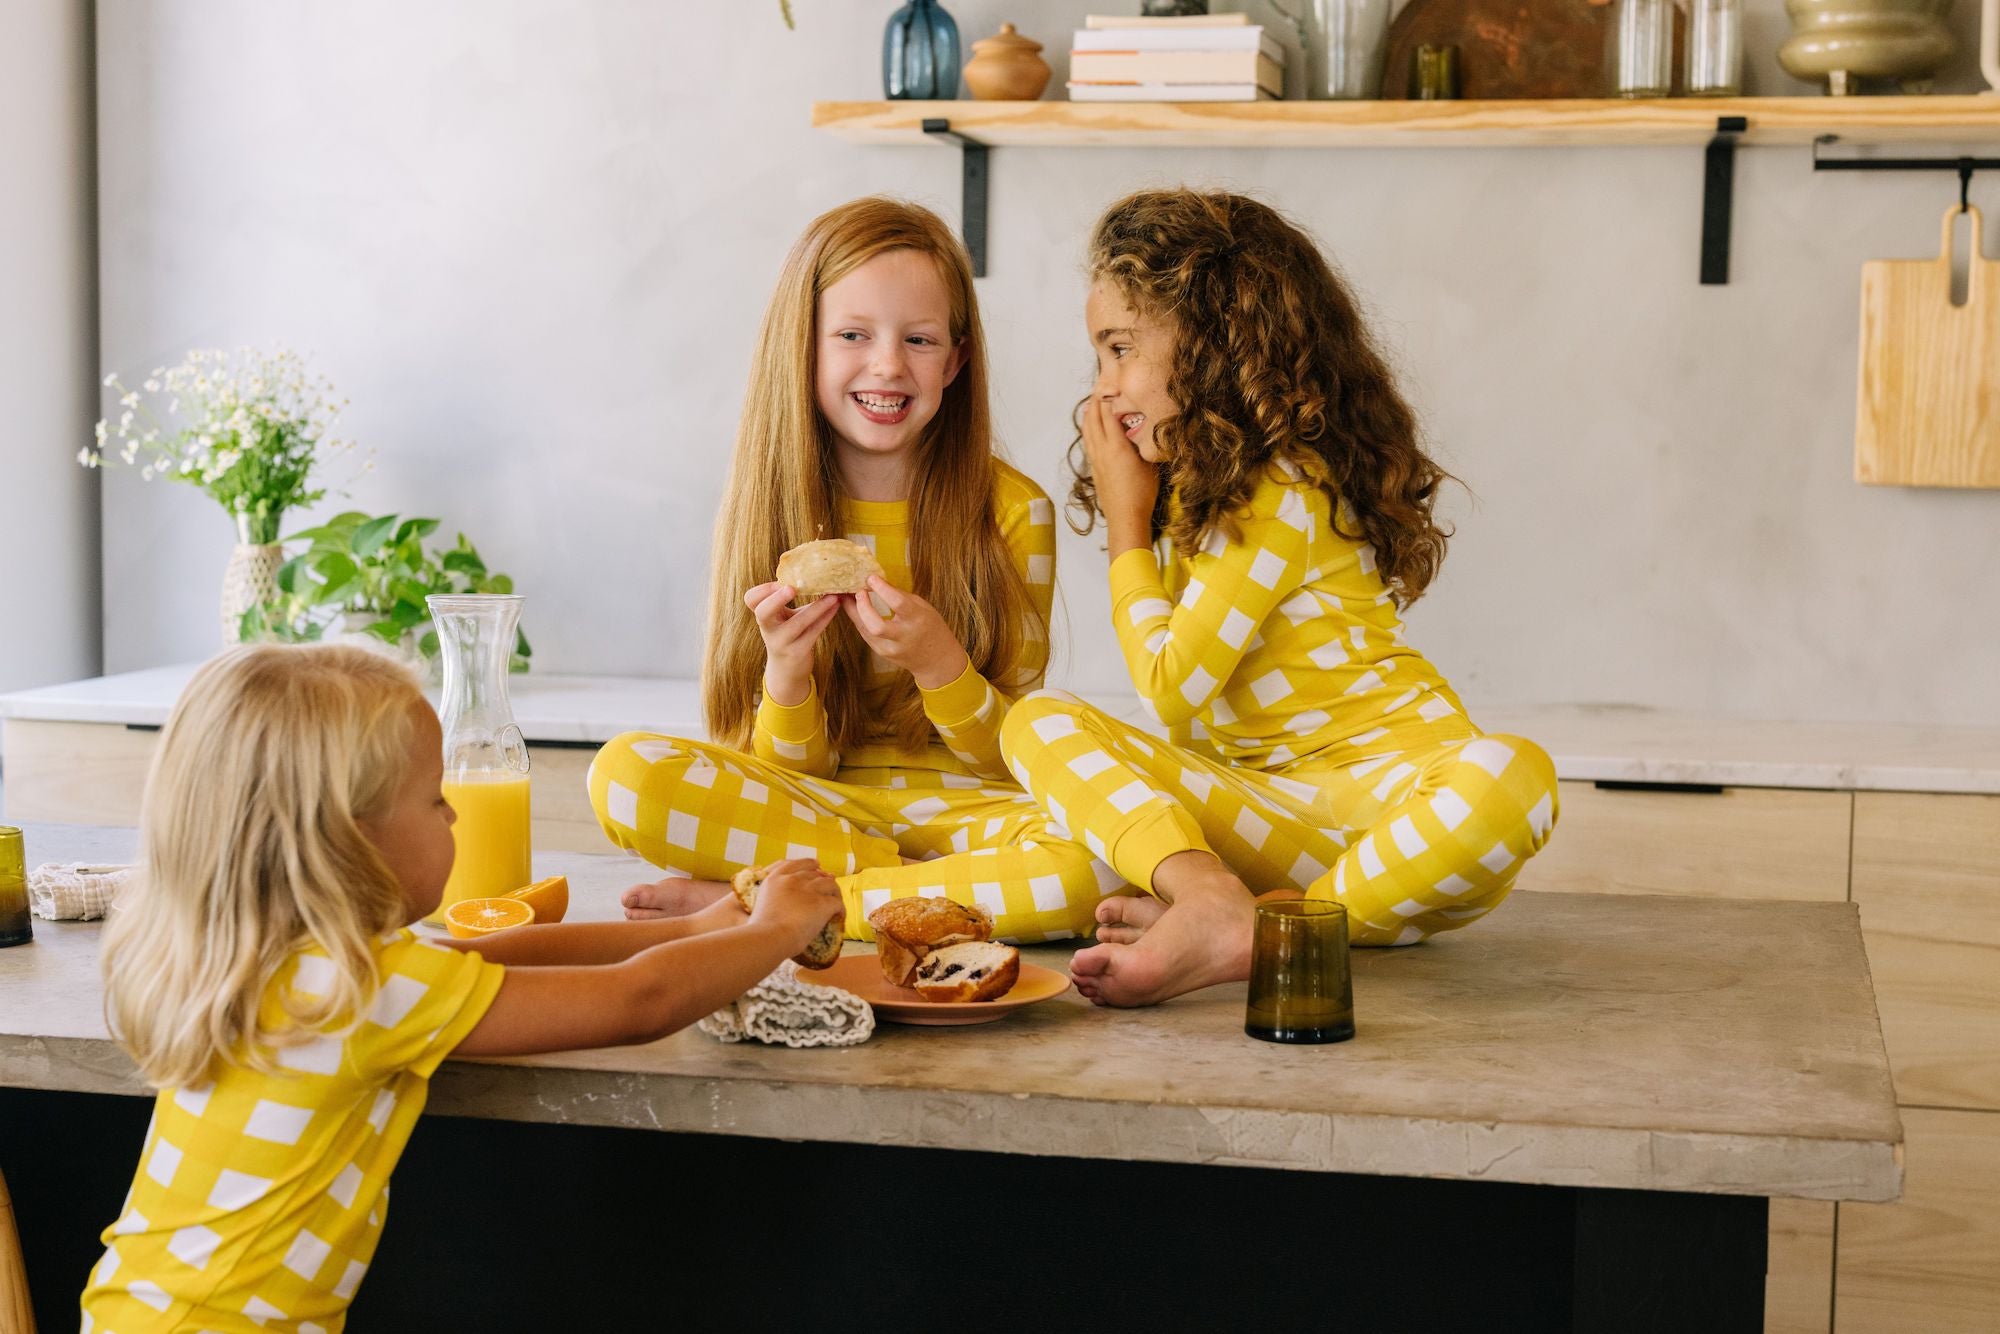 soft, yellow gingham pajama sets worn by two girls drinking orange juice and eating breakfast